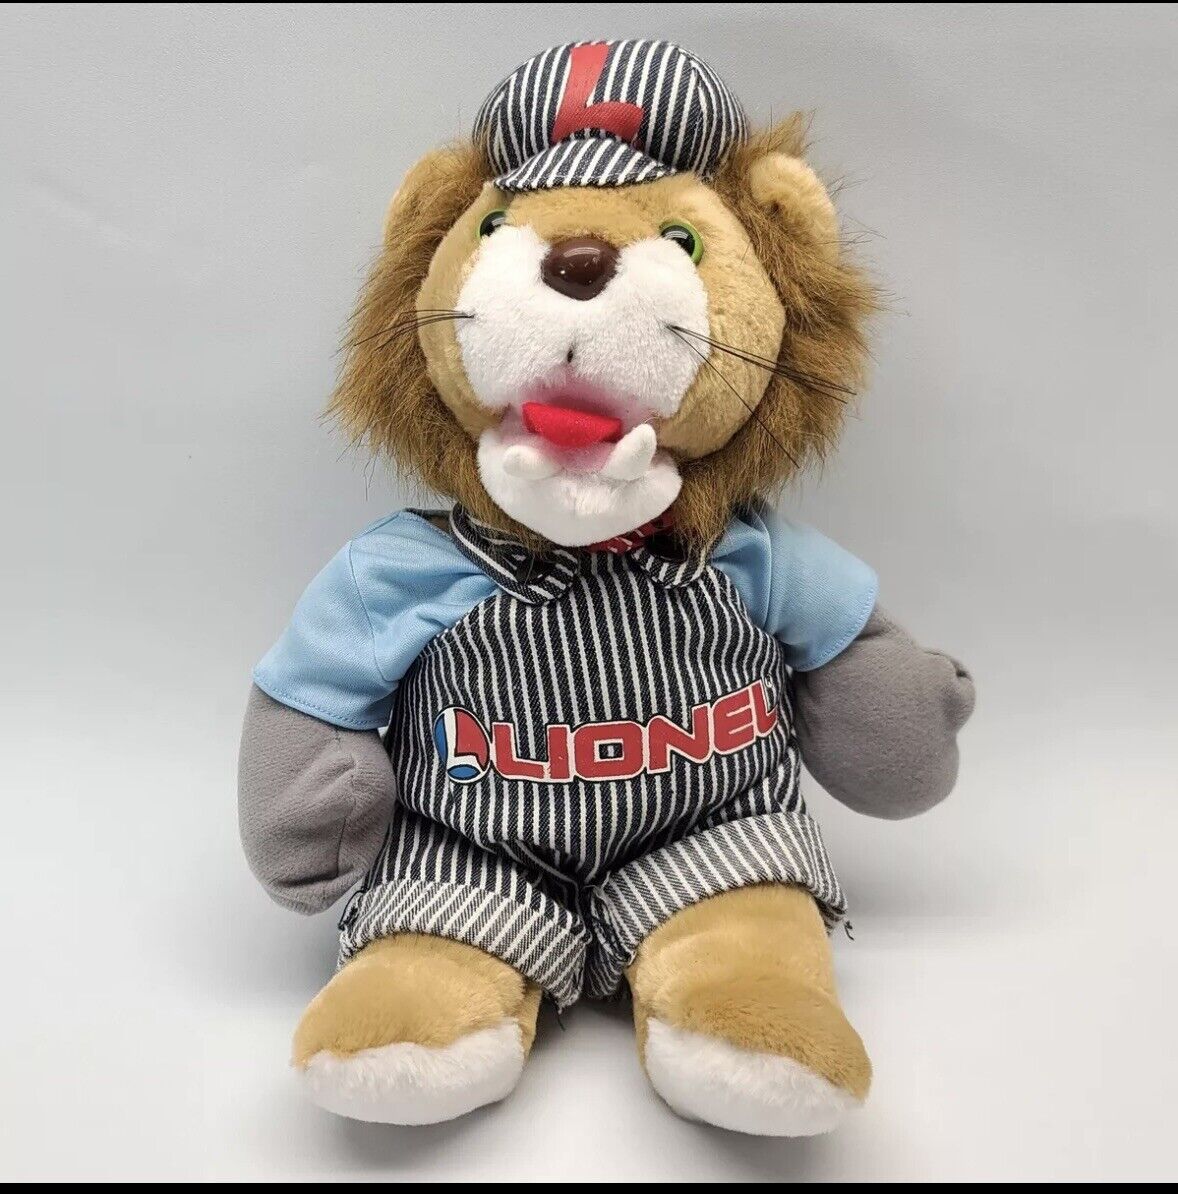 1991 Lenny The Lionel Lion Train Engineer Plush - 13” Tall - VINTAGE